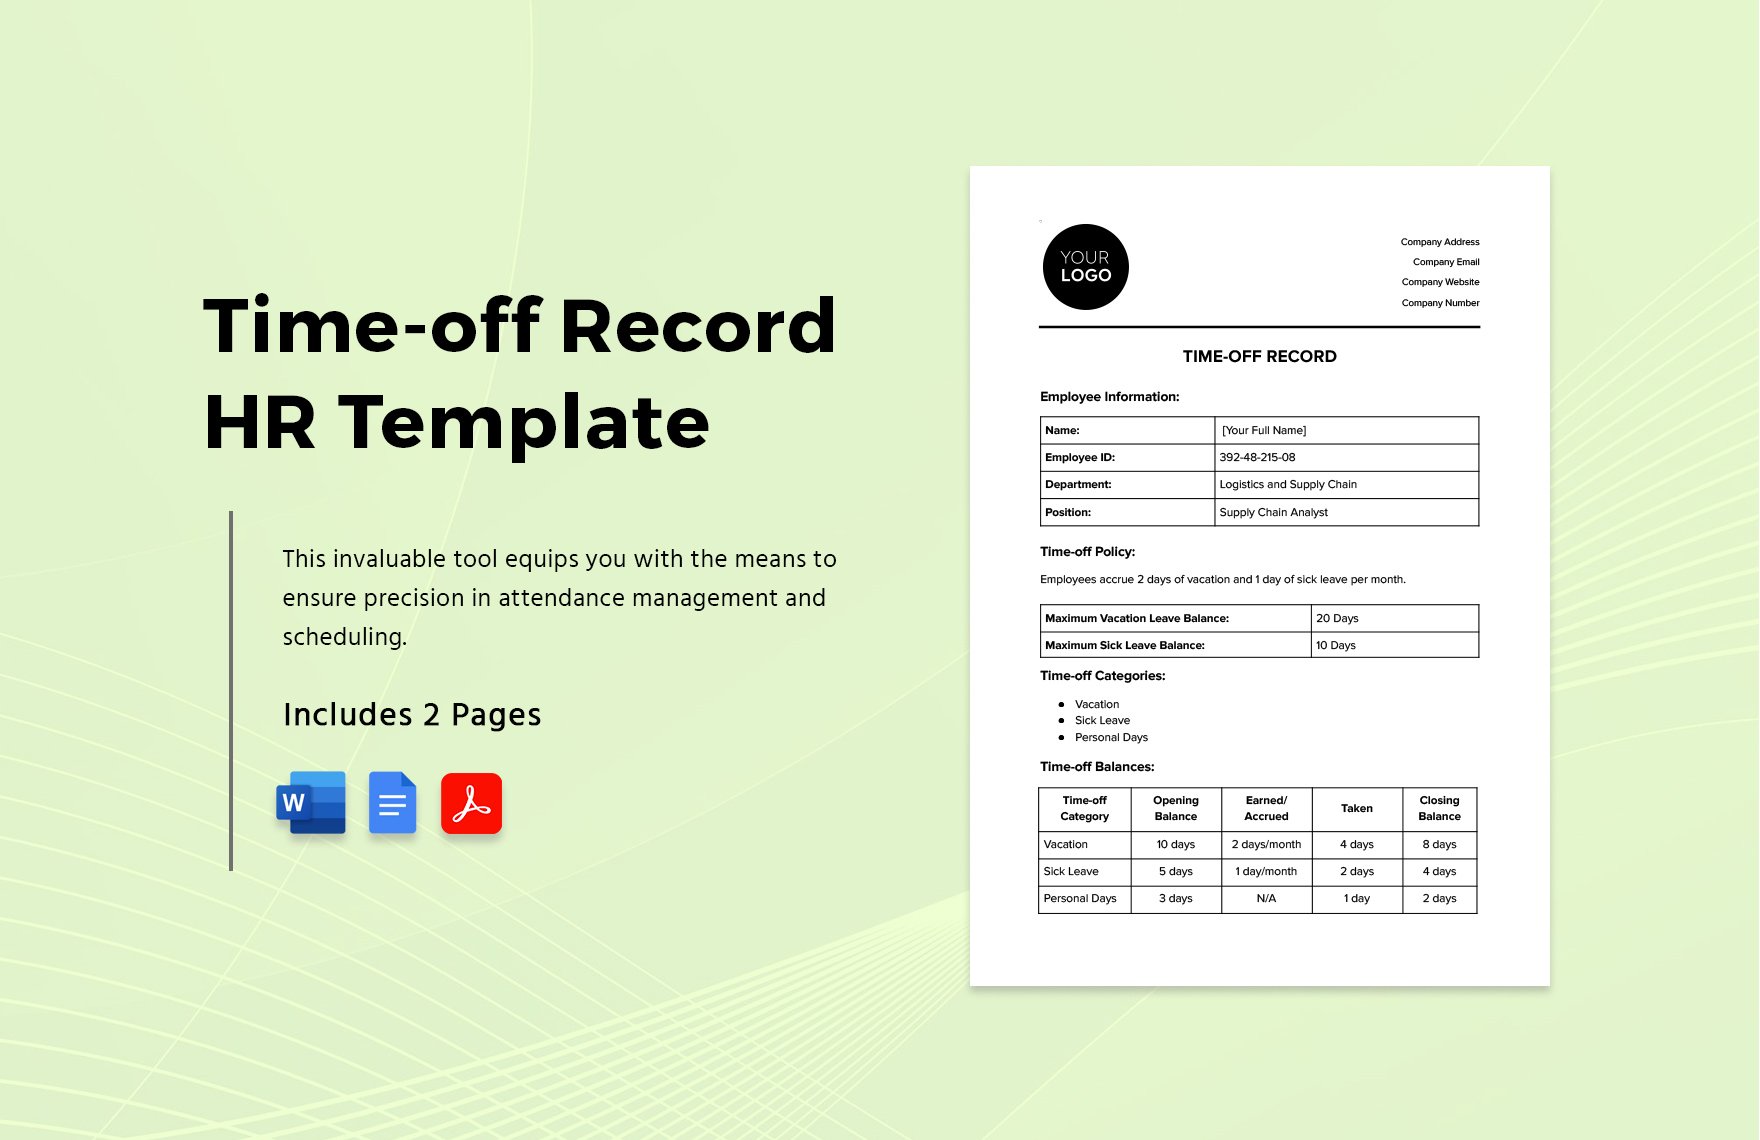 Time-off Record HR Template in Word, Google Docs, PDF